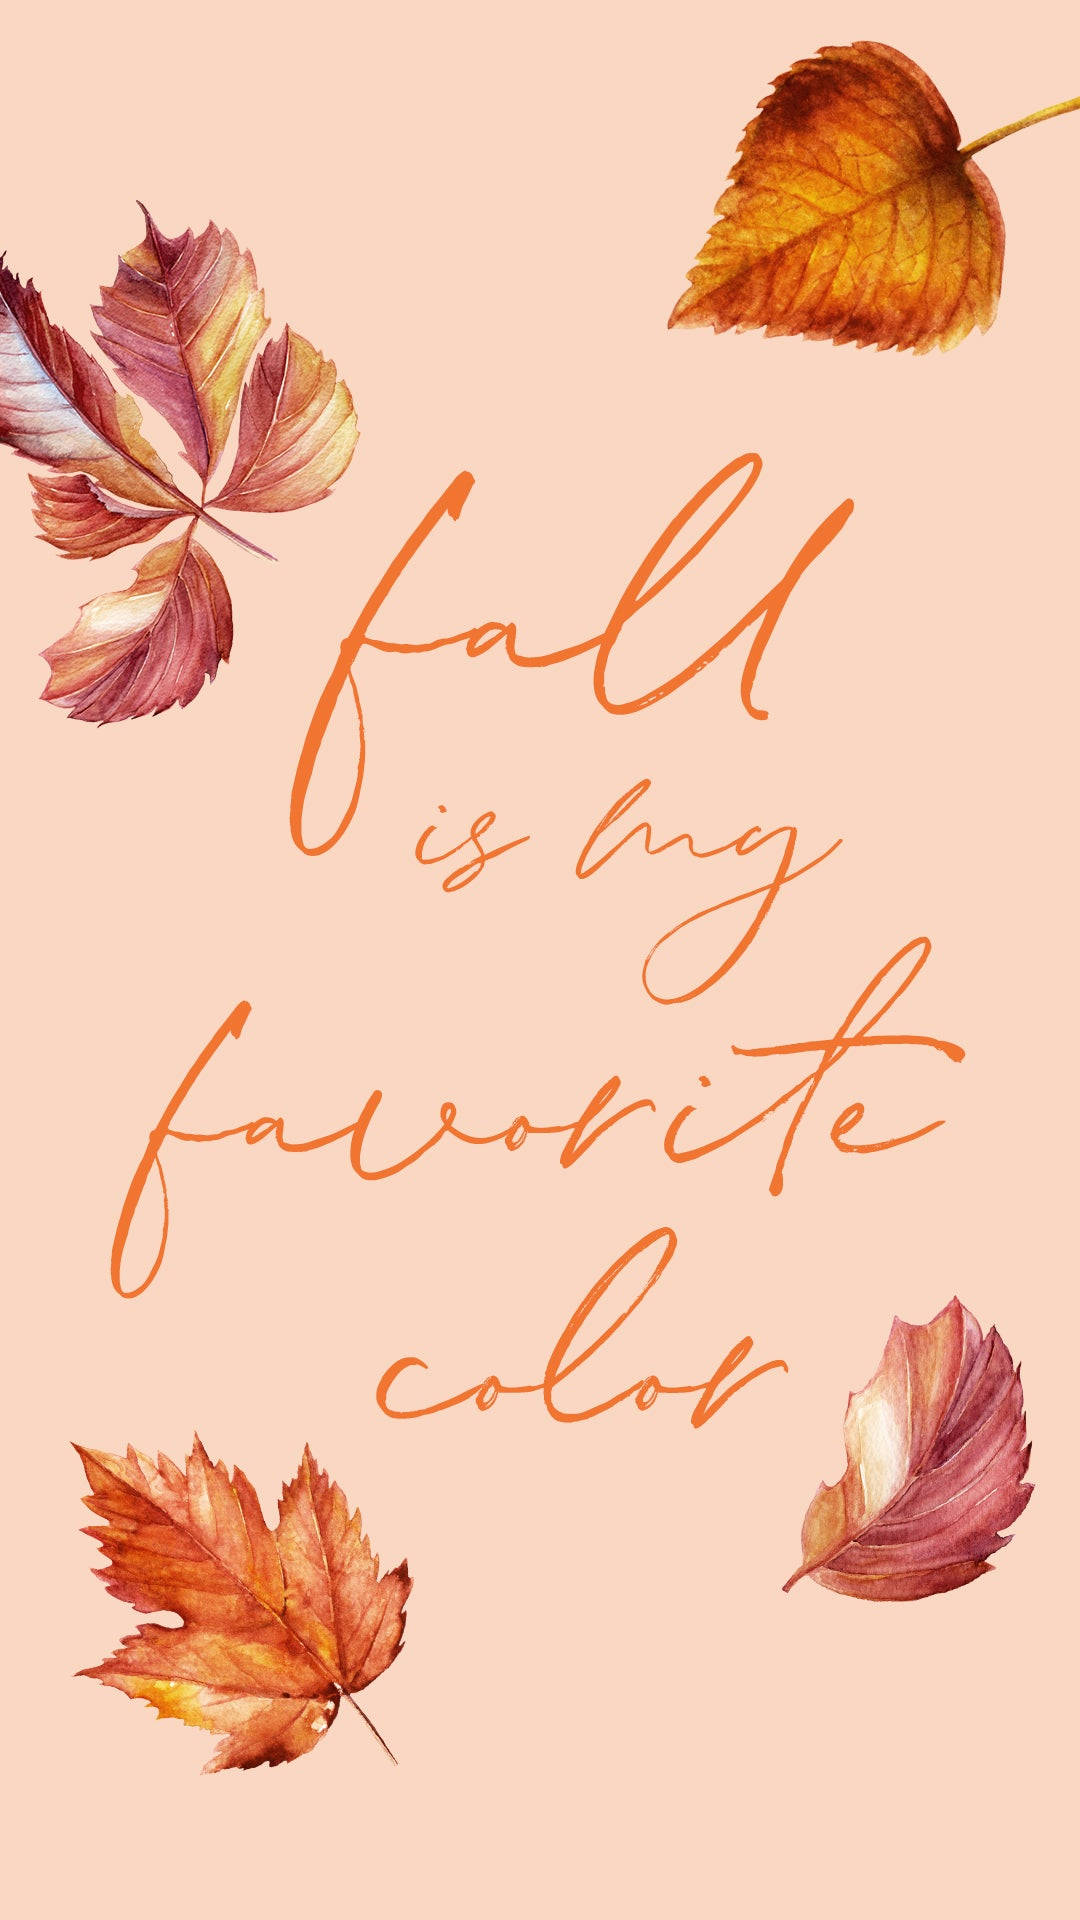 Add Cute Fall Vibes to Your Phone Wallpaper